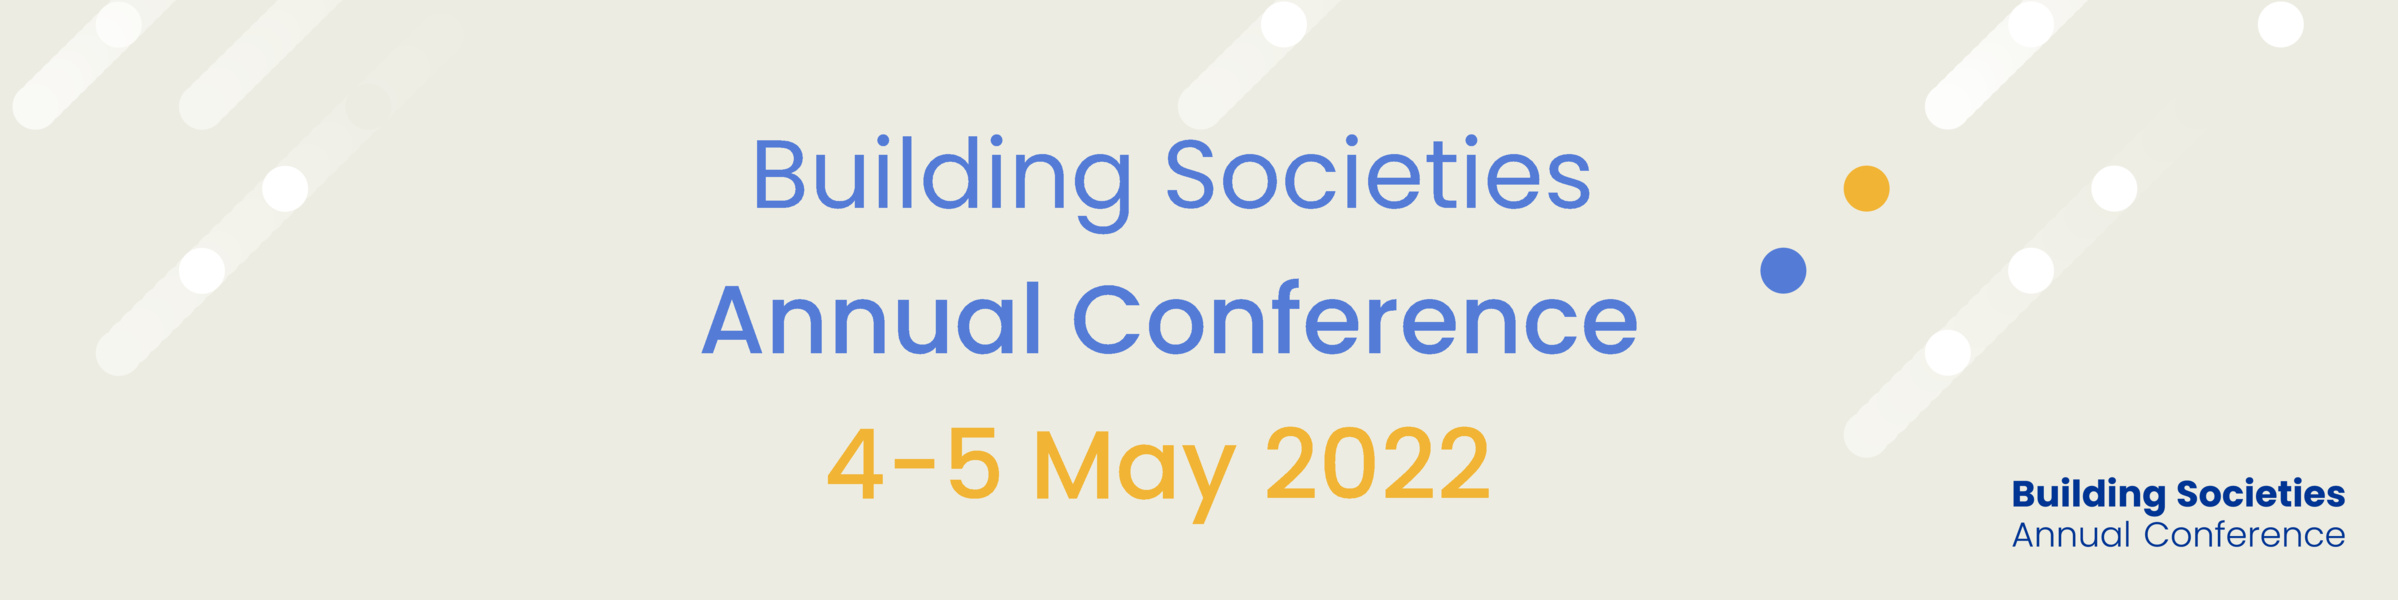 Building Societies Annual Conference 2022